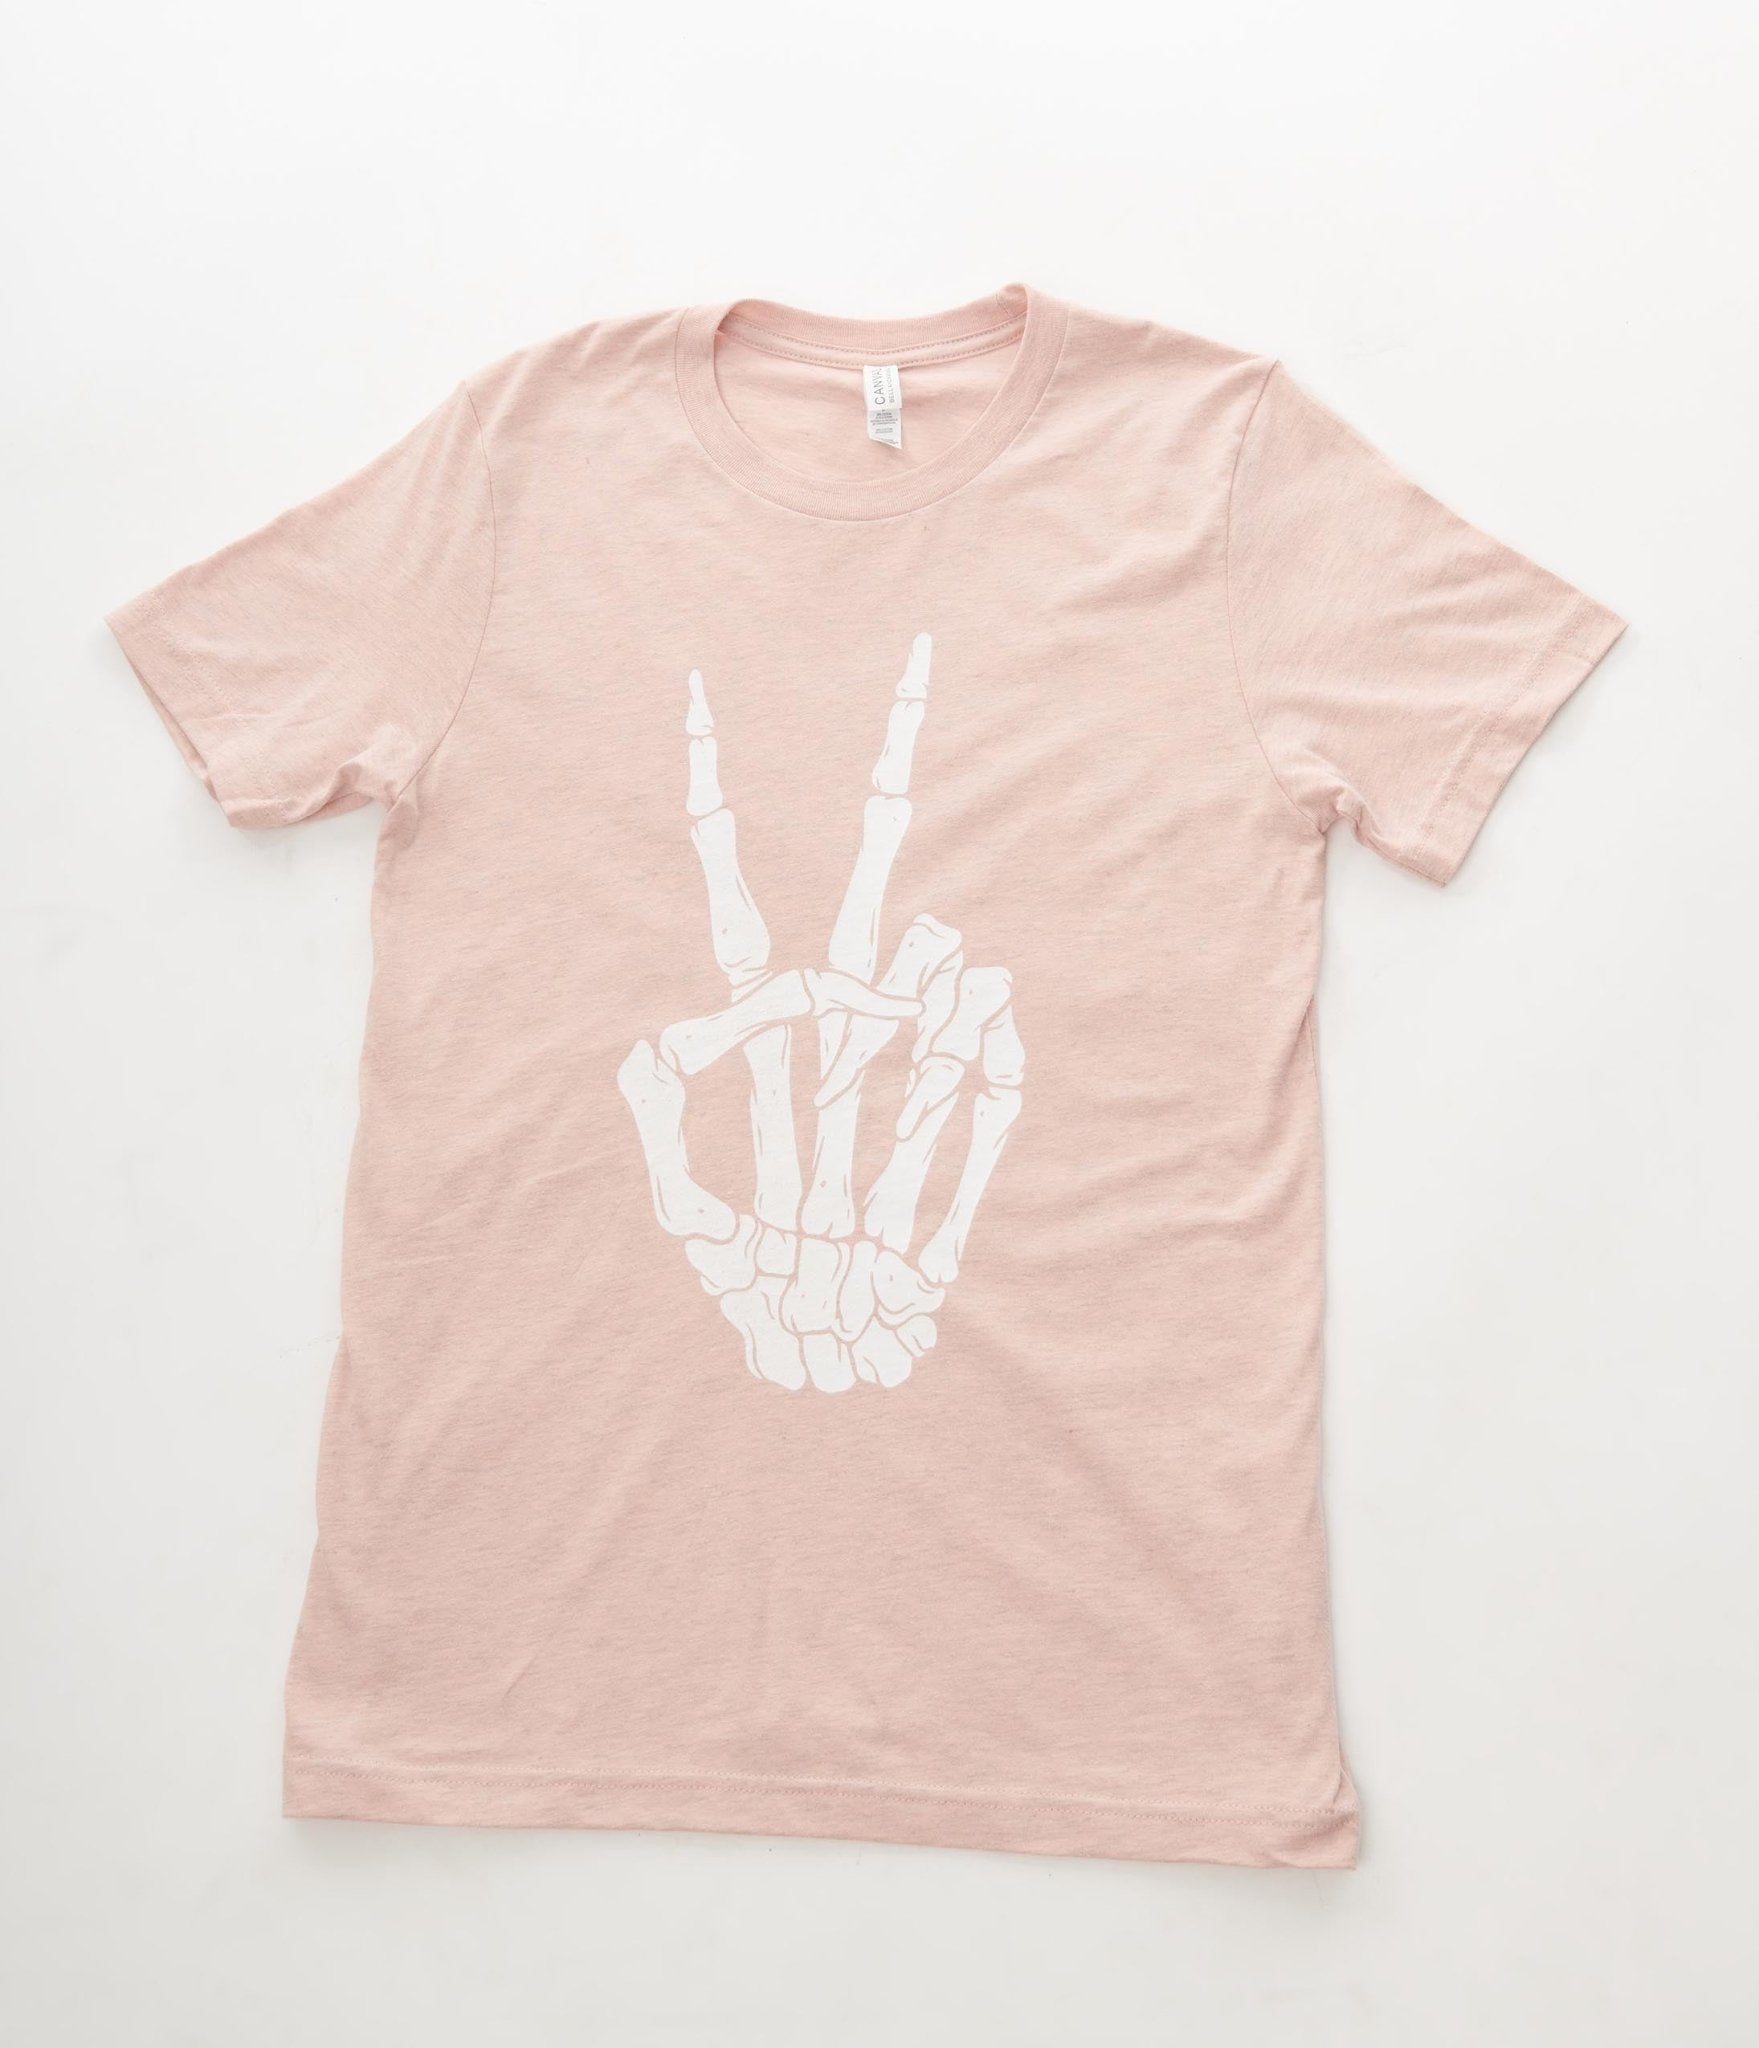 Pink & White Skeleton Peace Sign Unisex Graphic Tee - Unique Vintage - Womens, GRAPHIC TEES, TEES